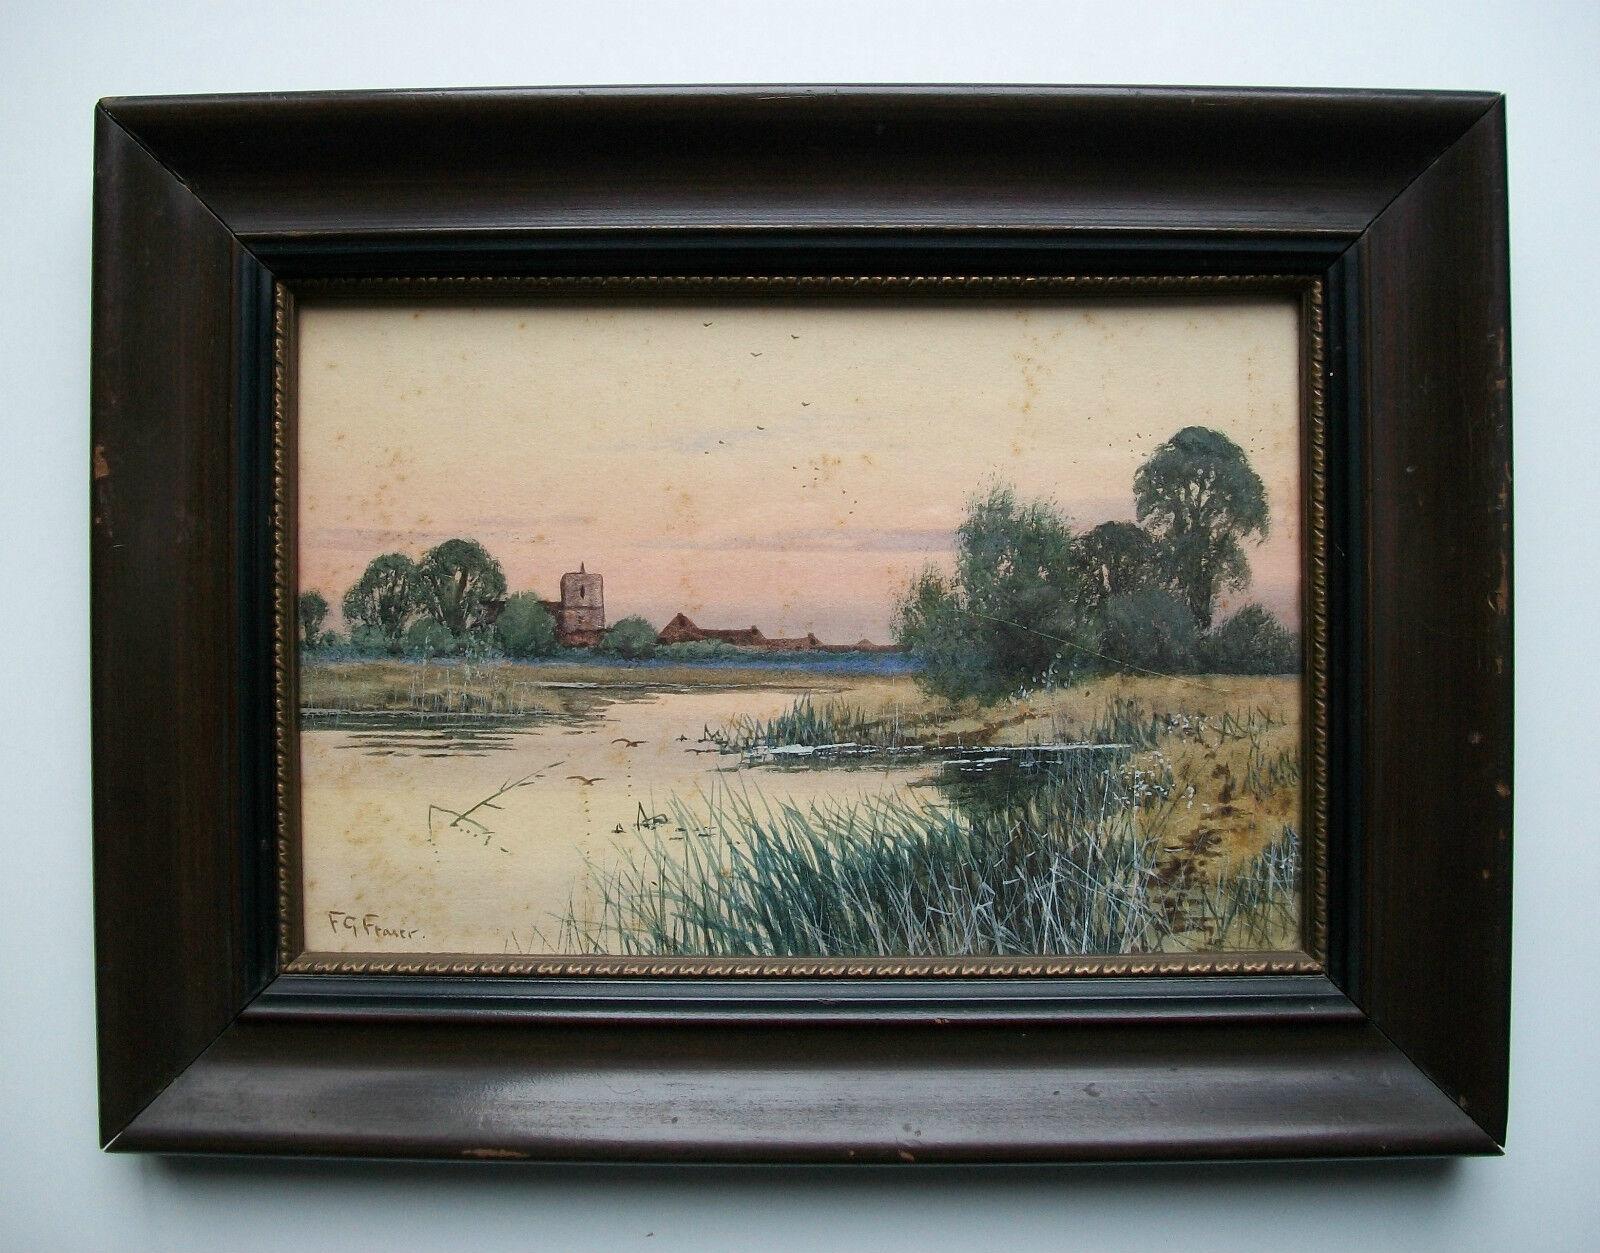 English F.G. FRASER - Cambridge River View - Watercolor - Framed - U.K. - 19th Century For Sale